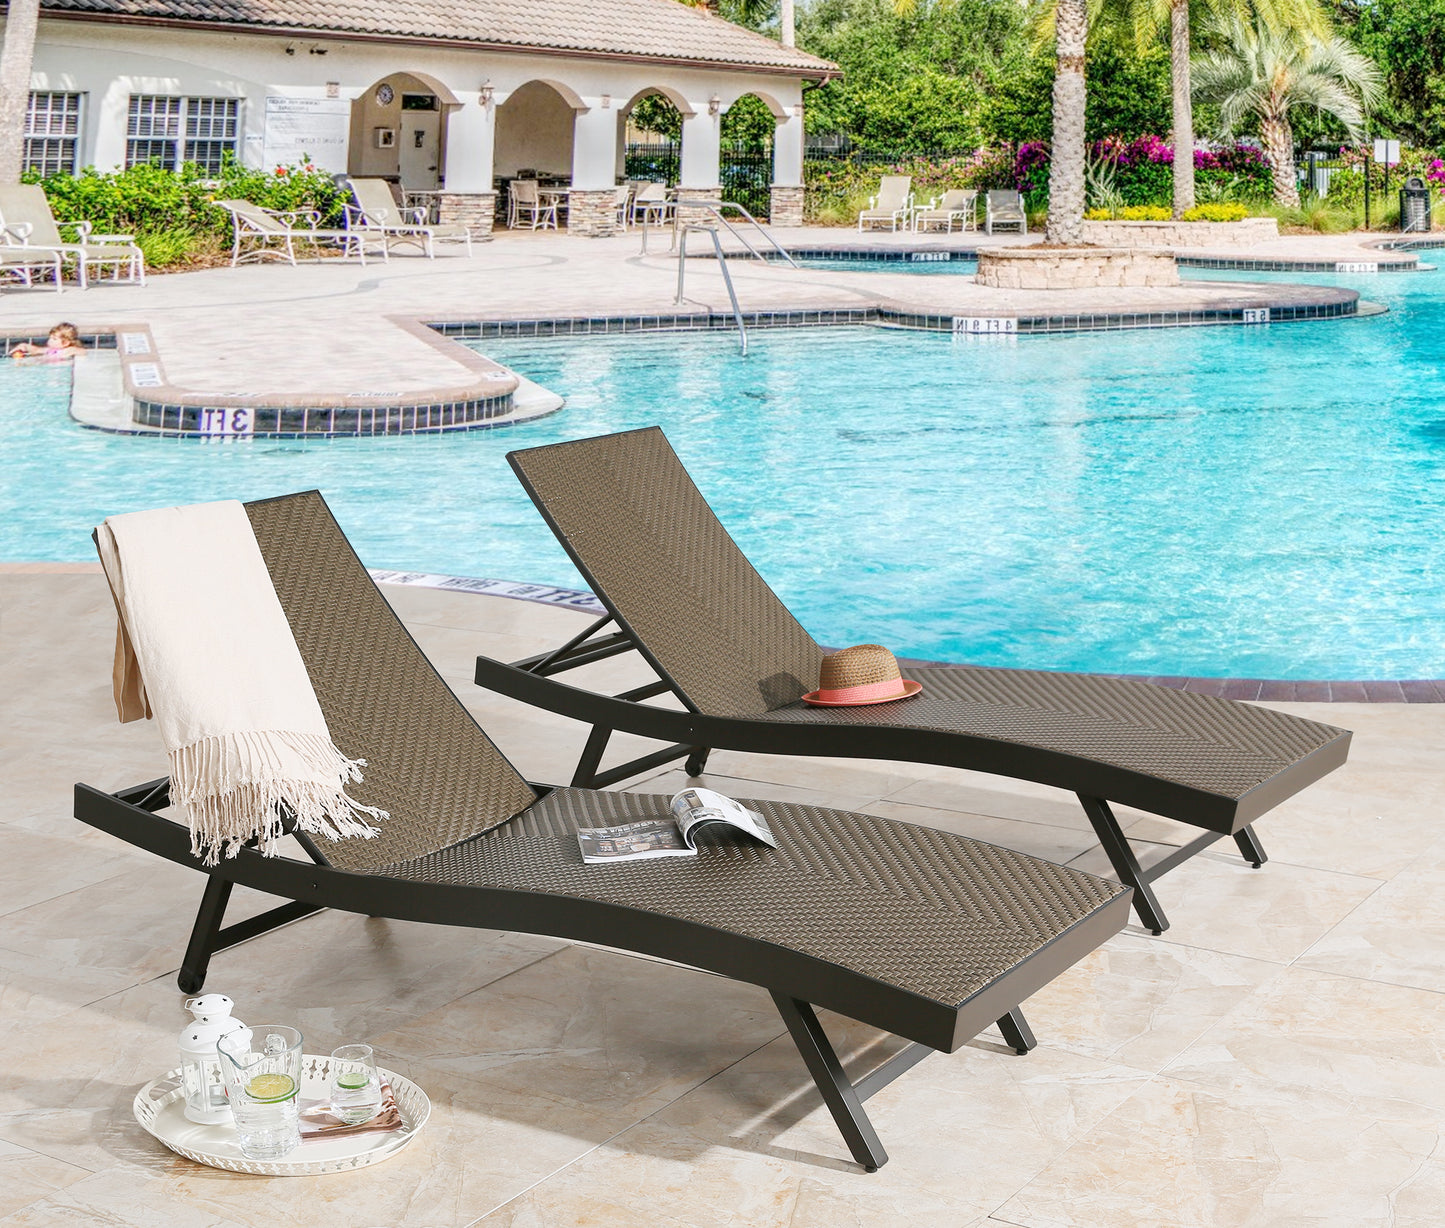 Outdoor Wicker Chaise Lounge Patio Adjustable Reclining Chaise Lounge Chair with Wheels, Set of 2